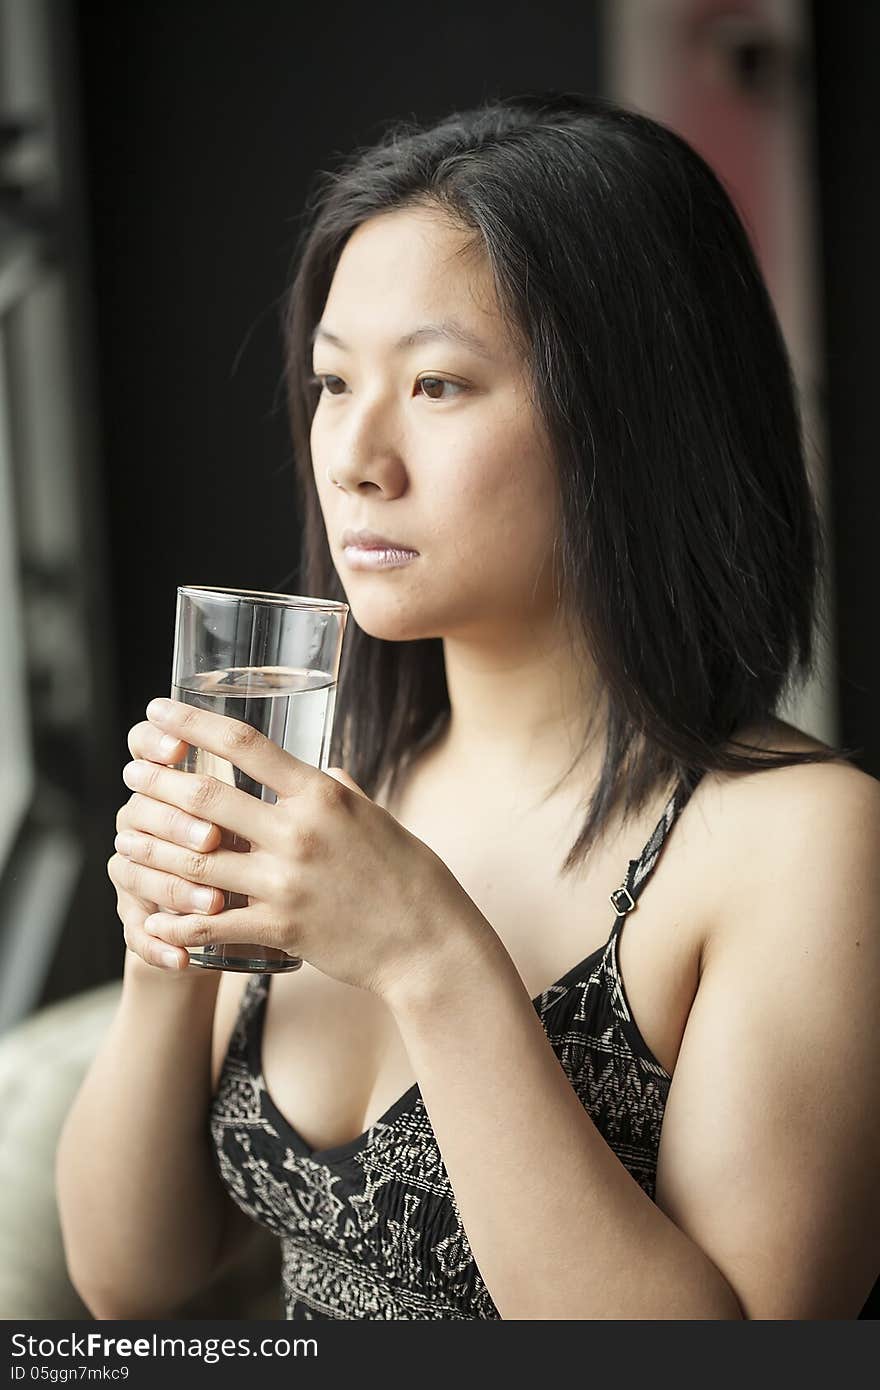 Beautiful Asian woman with brown hair and eyes drinking water from a glass. Beautiful Asian woman with brown hair and eyes drinking water from a glass.